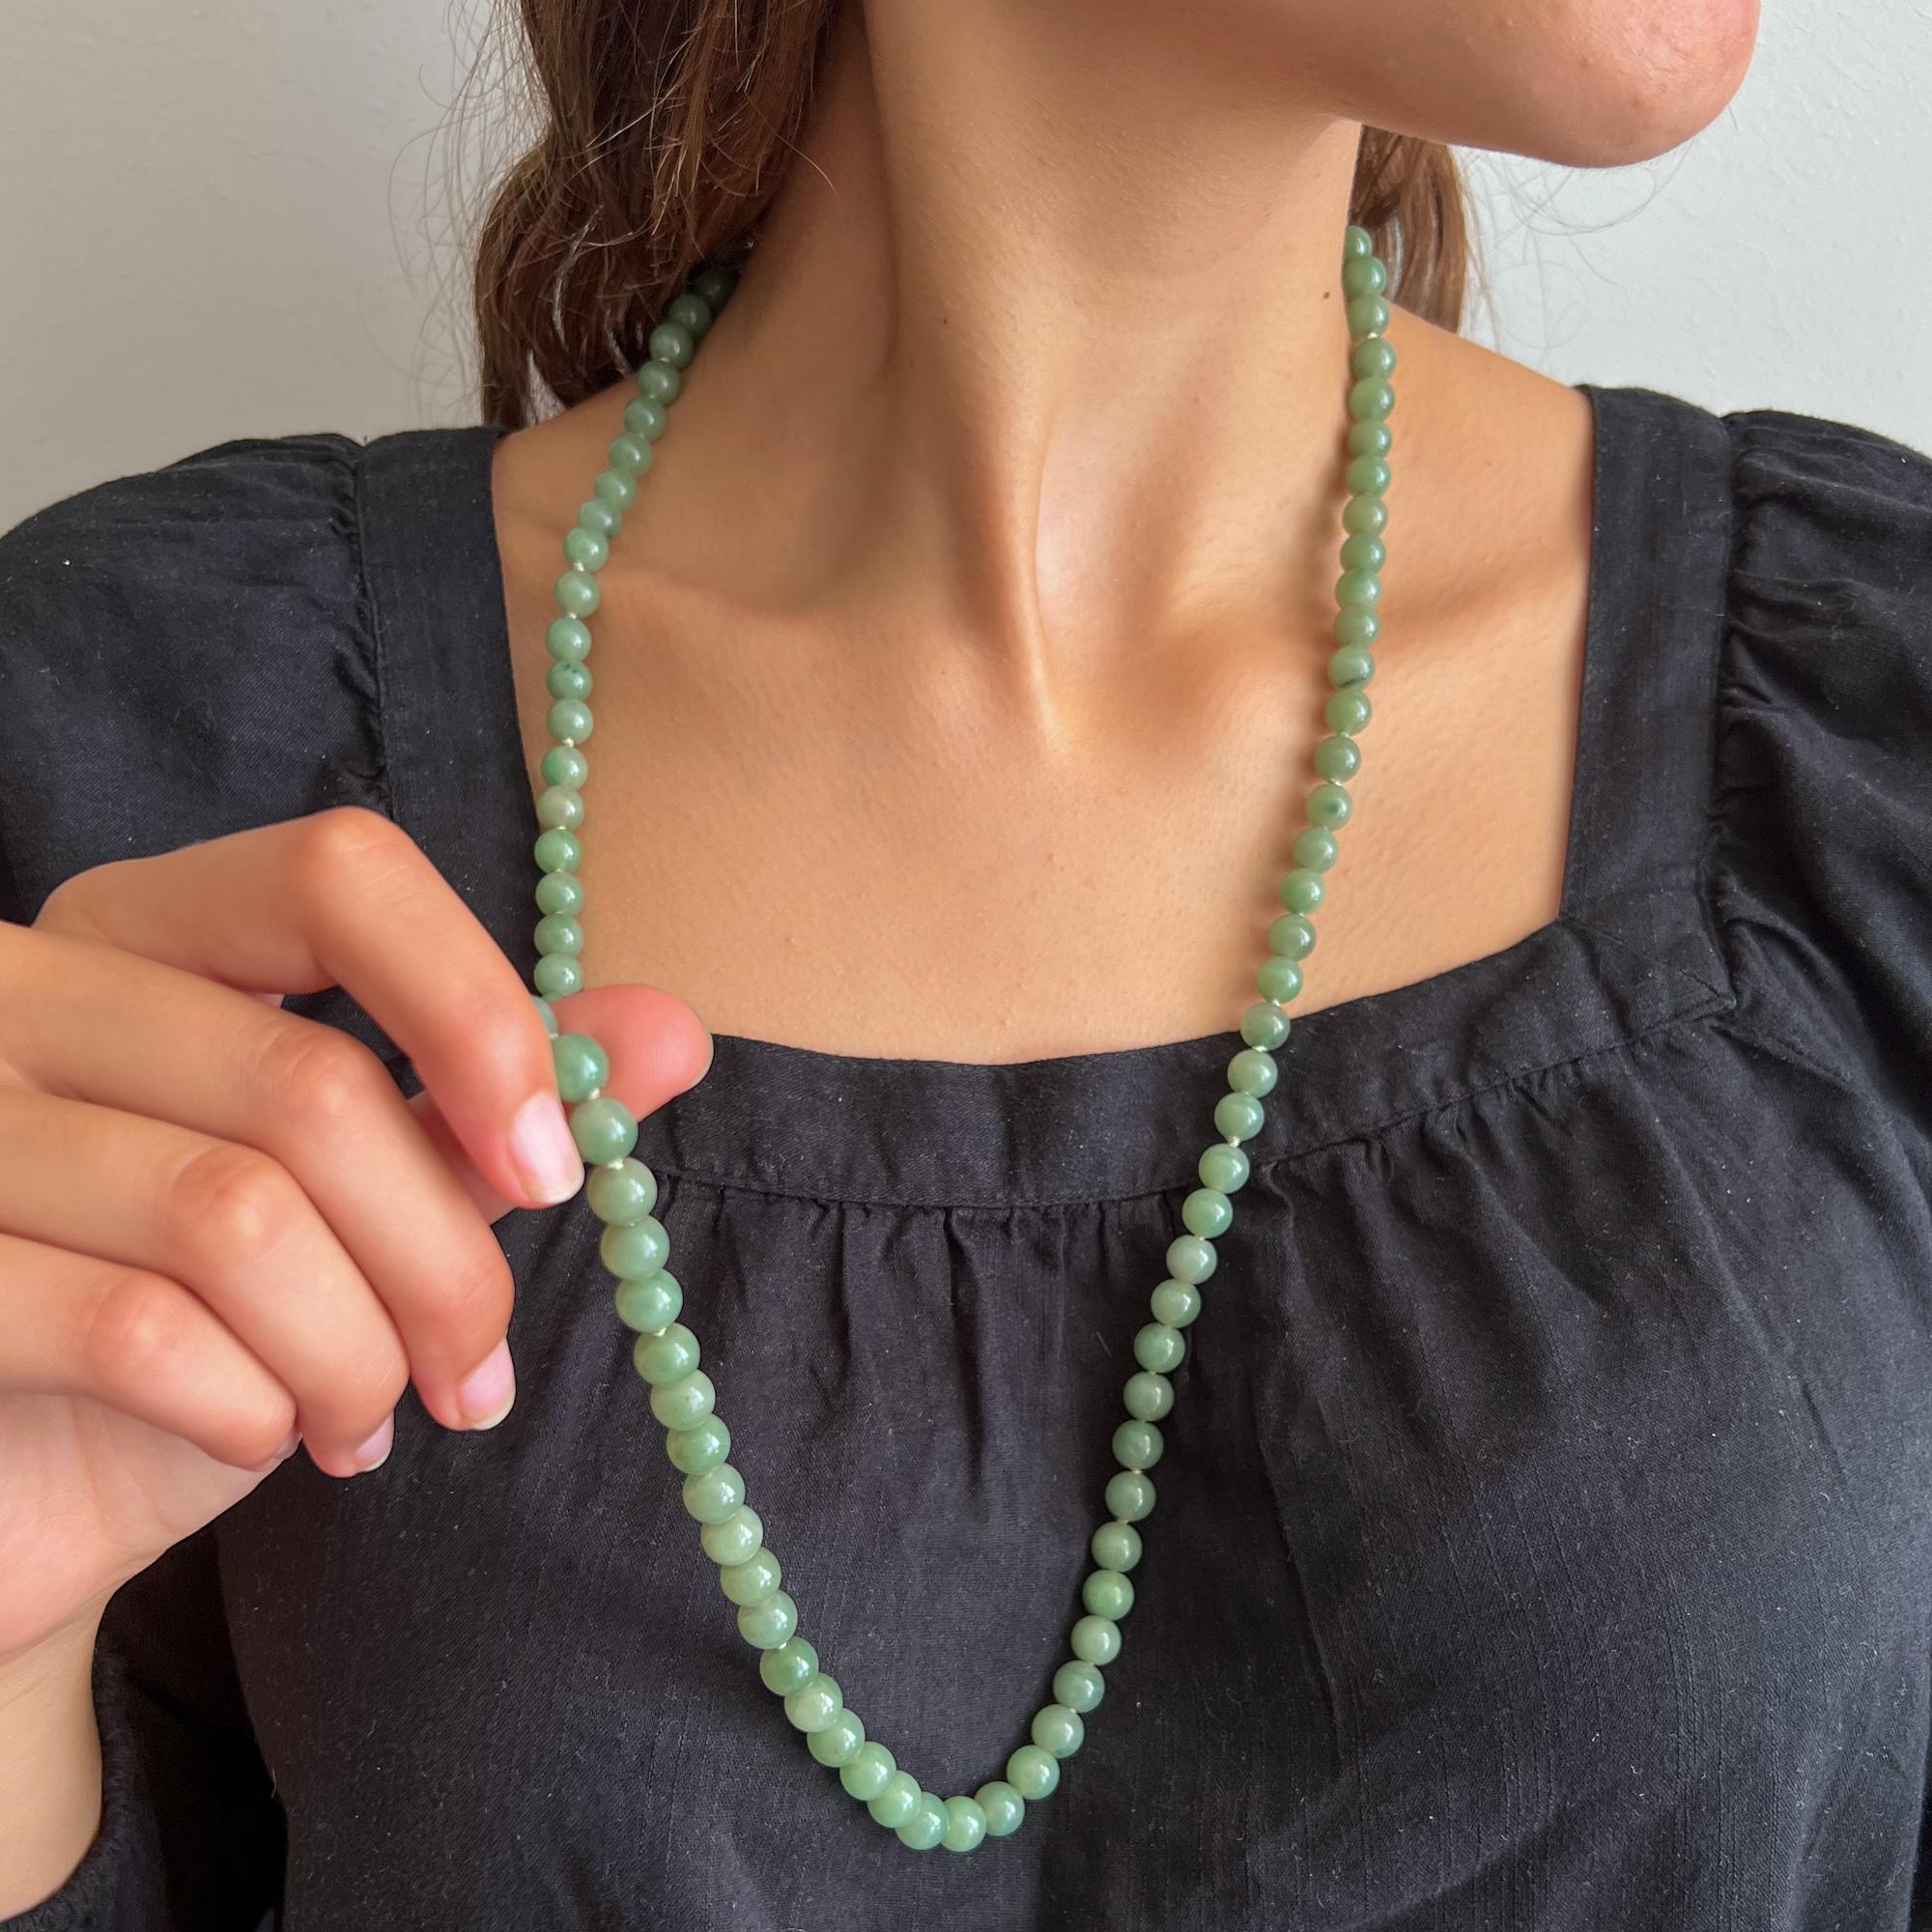 A vintage green jade single-strand beaded necklace with a 14 karat clasp in the shape of a barrel. The necklace consists of beautiful round-shaped jadeite jade stones, the jade beads have a very nice green color. The strands are strung with round